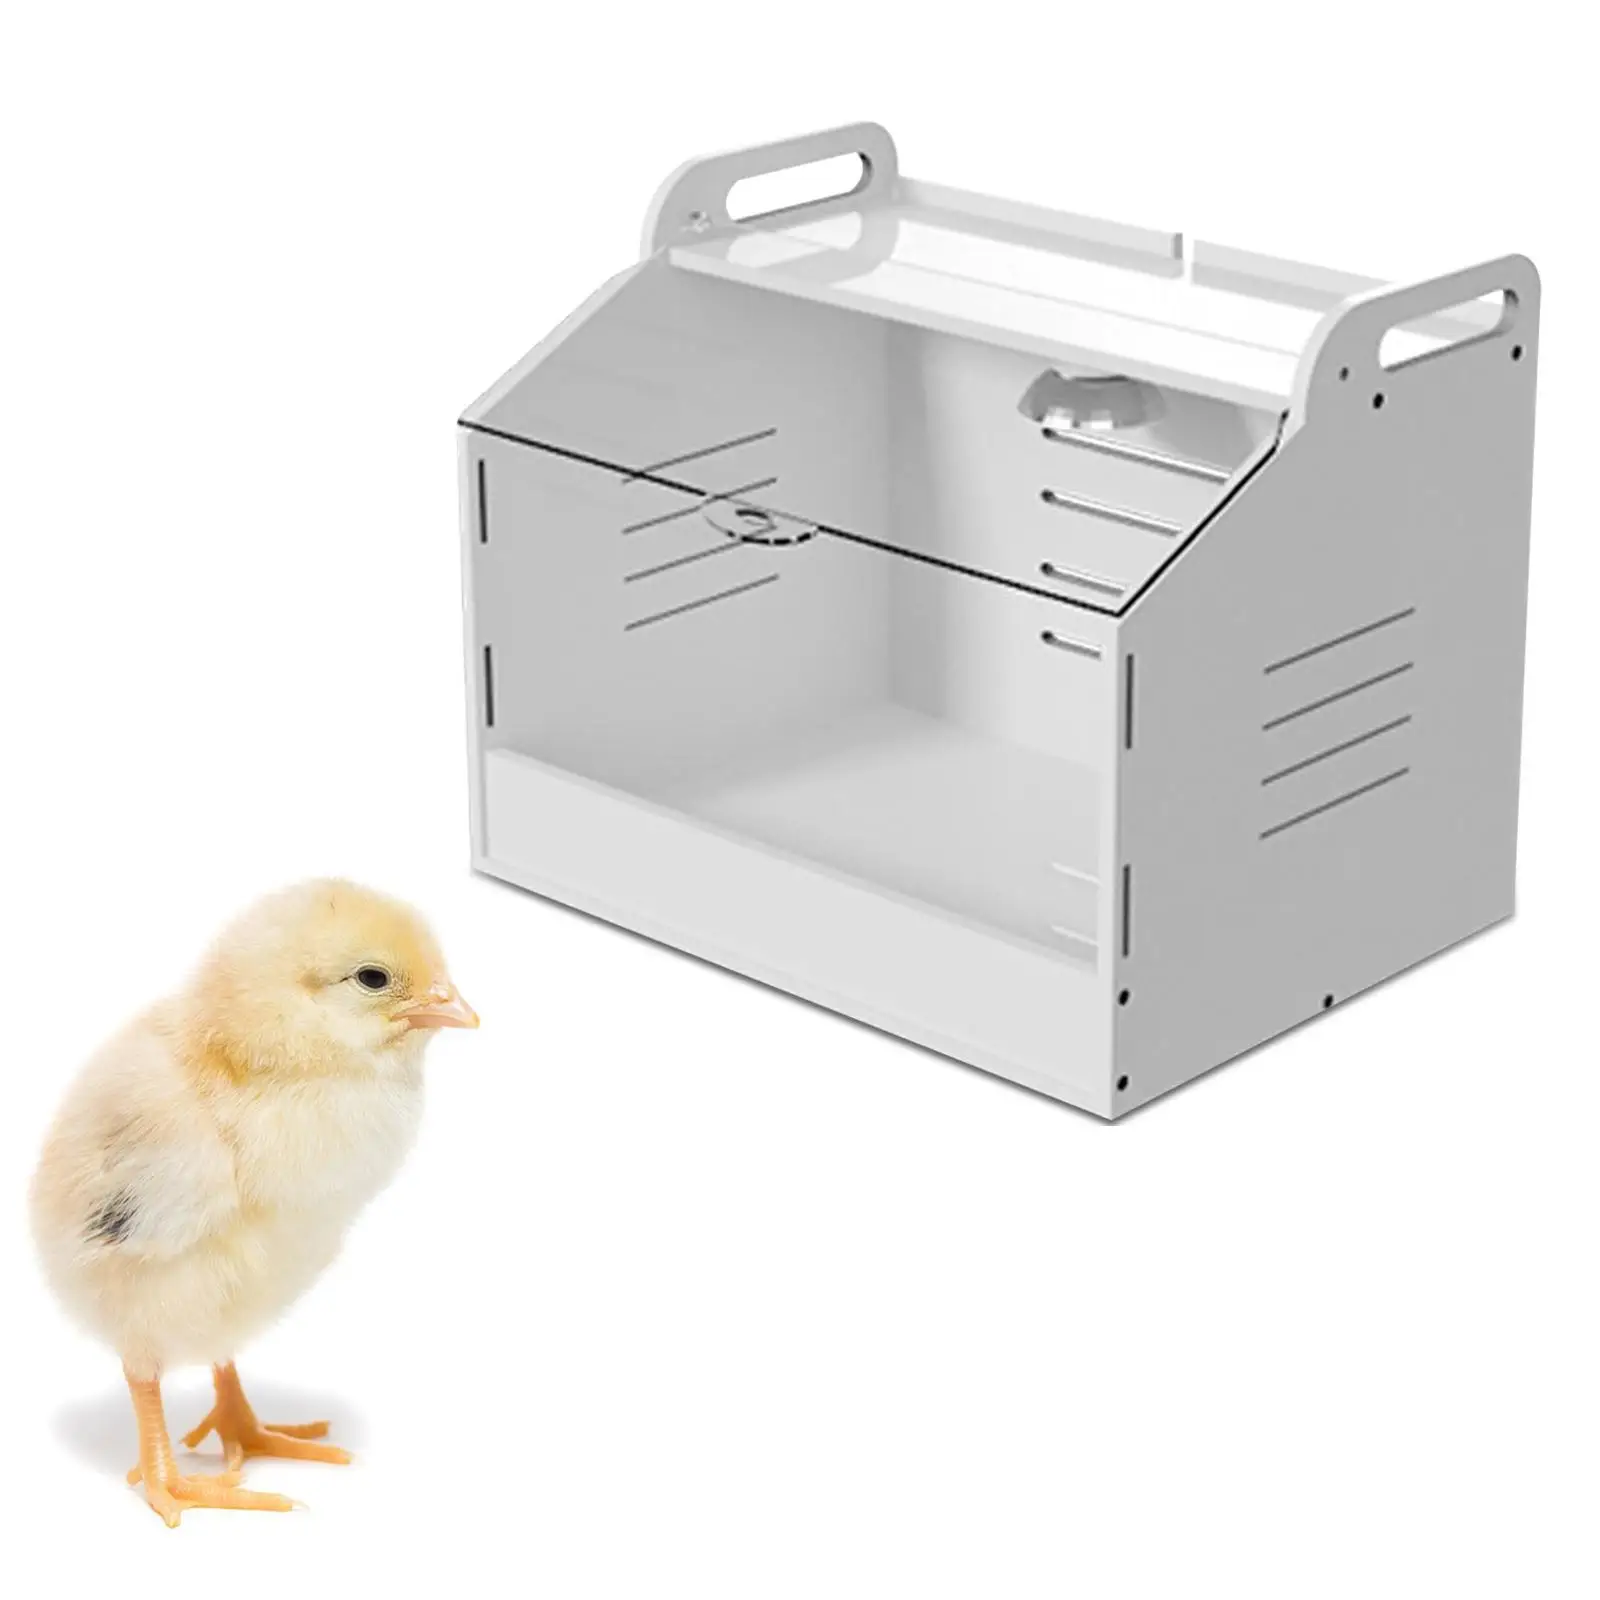 Egg Incubator Hatching High Temperature Incubation Box Automatic Poultry Hatcher Machine Farm Equipment for Turkey Bird Brooding